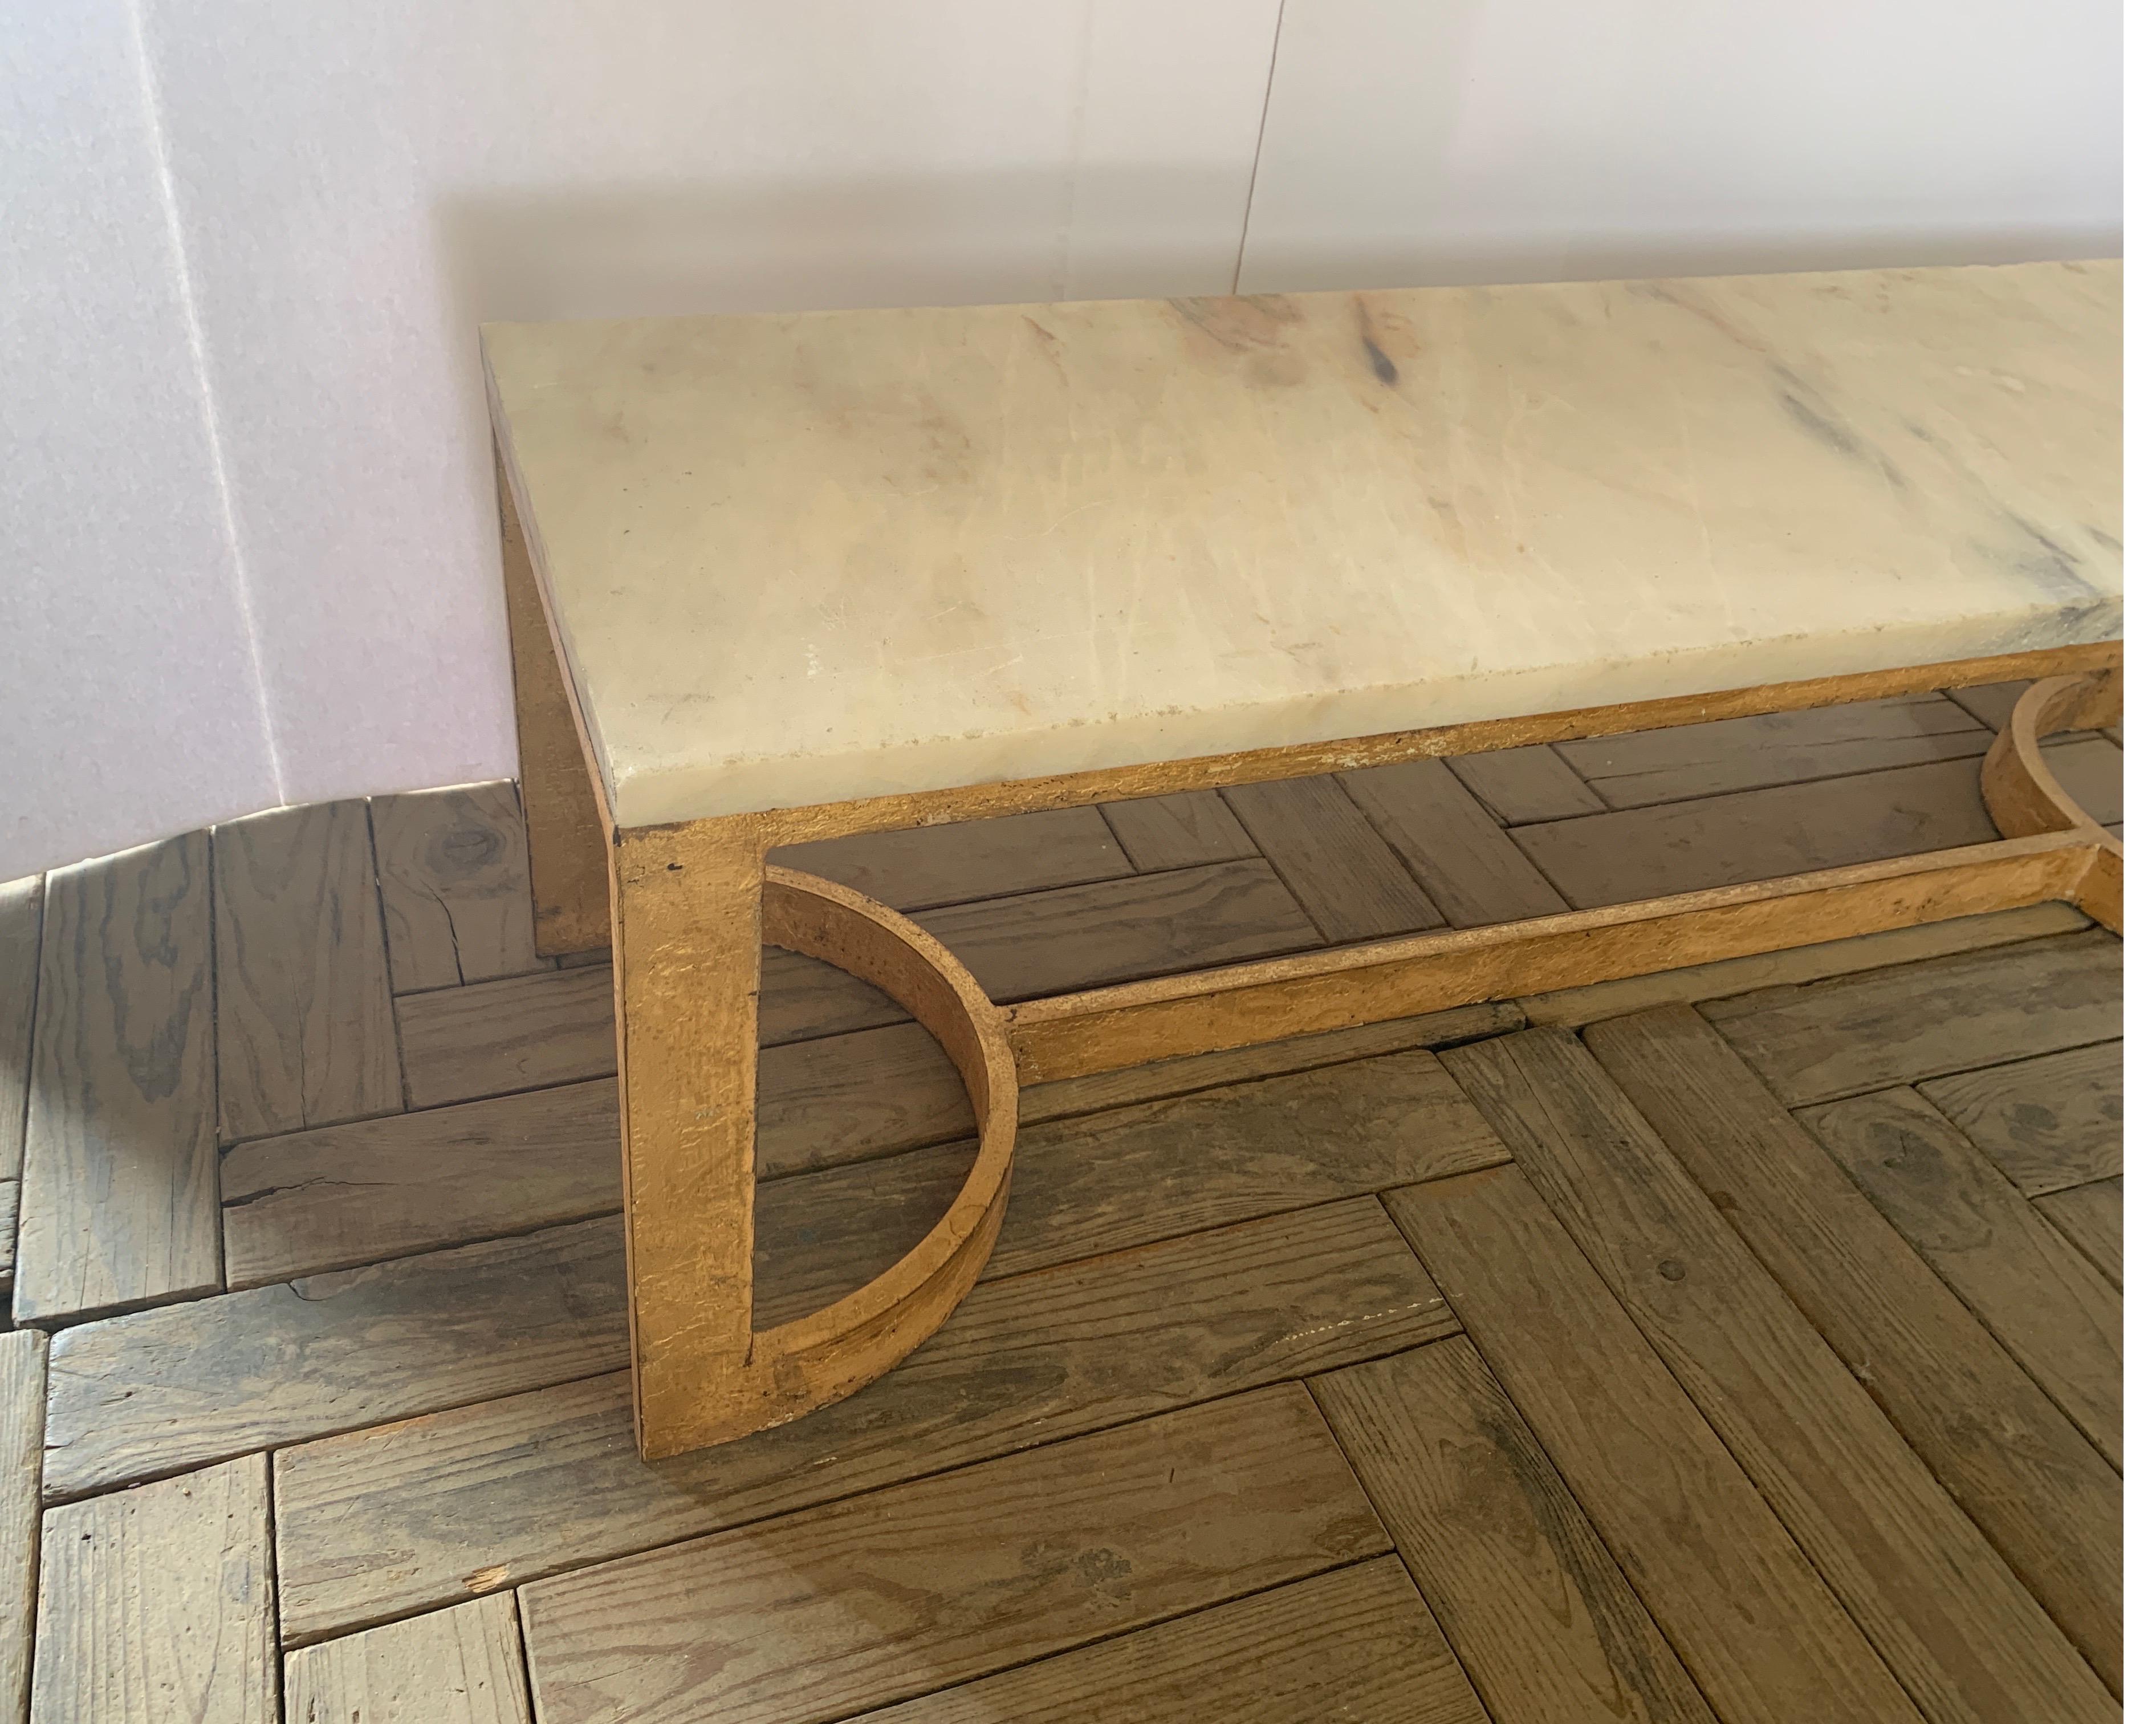 This is our own heavy duty iron rectangular coffee table with vintage one inch marble top. It has a gold distressed finish and great for a cocktail table as well.